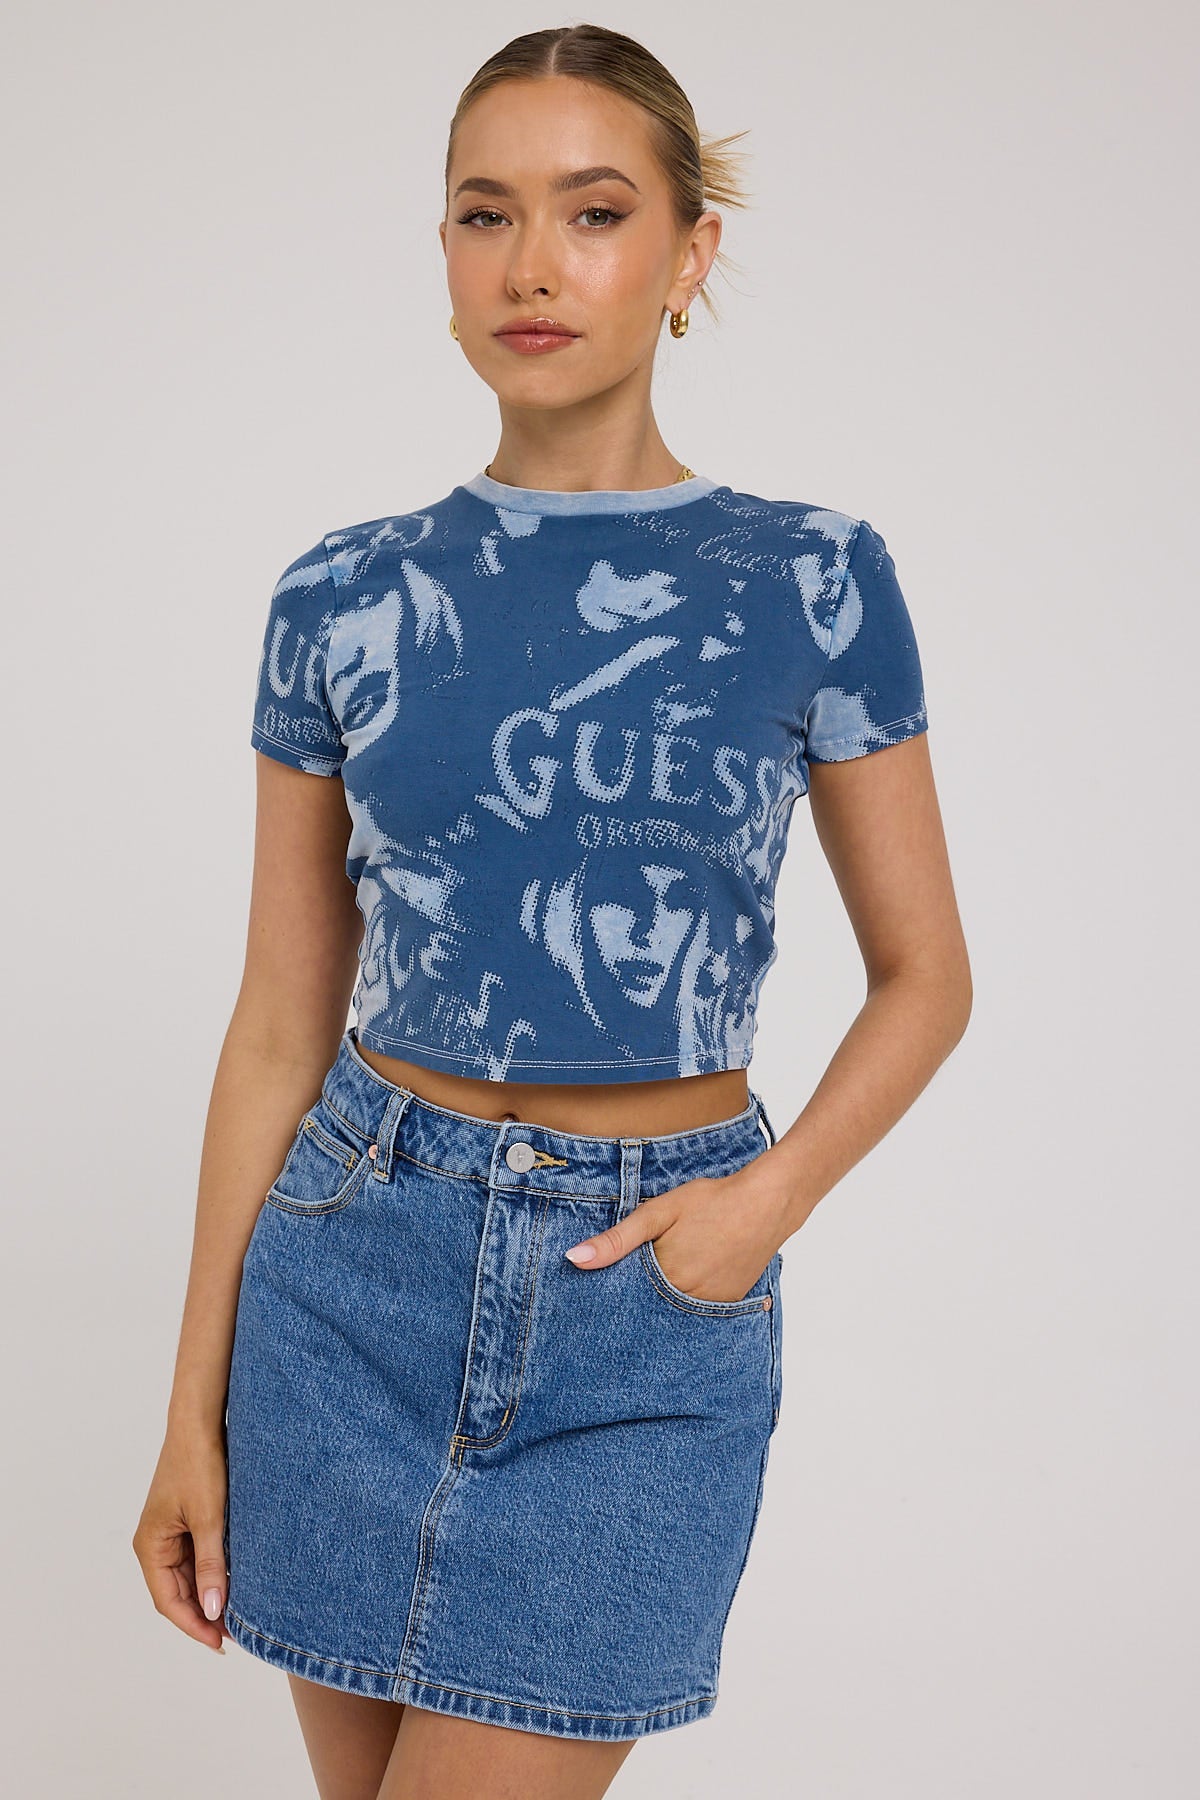 Guess Originals GO Classic Baby Tee Pennant Blue